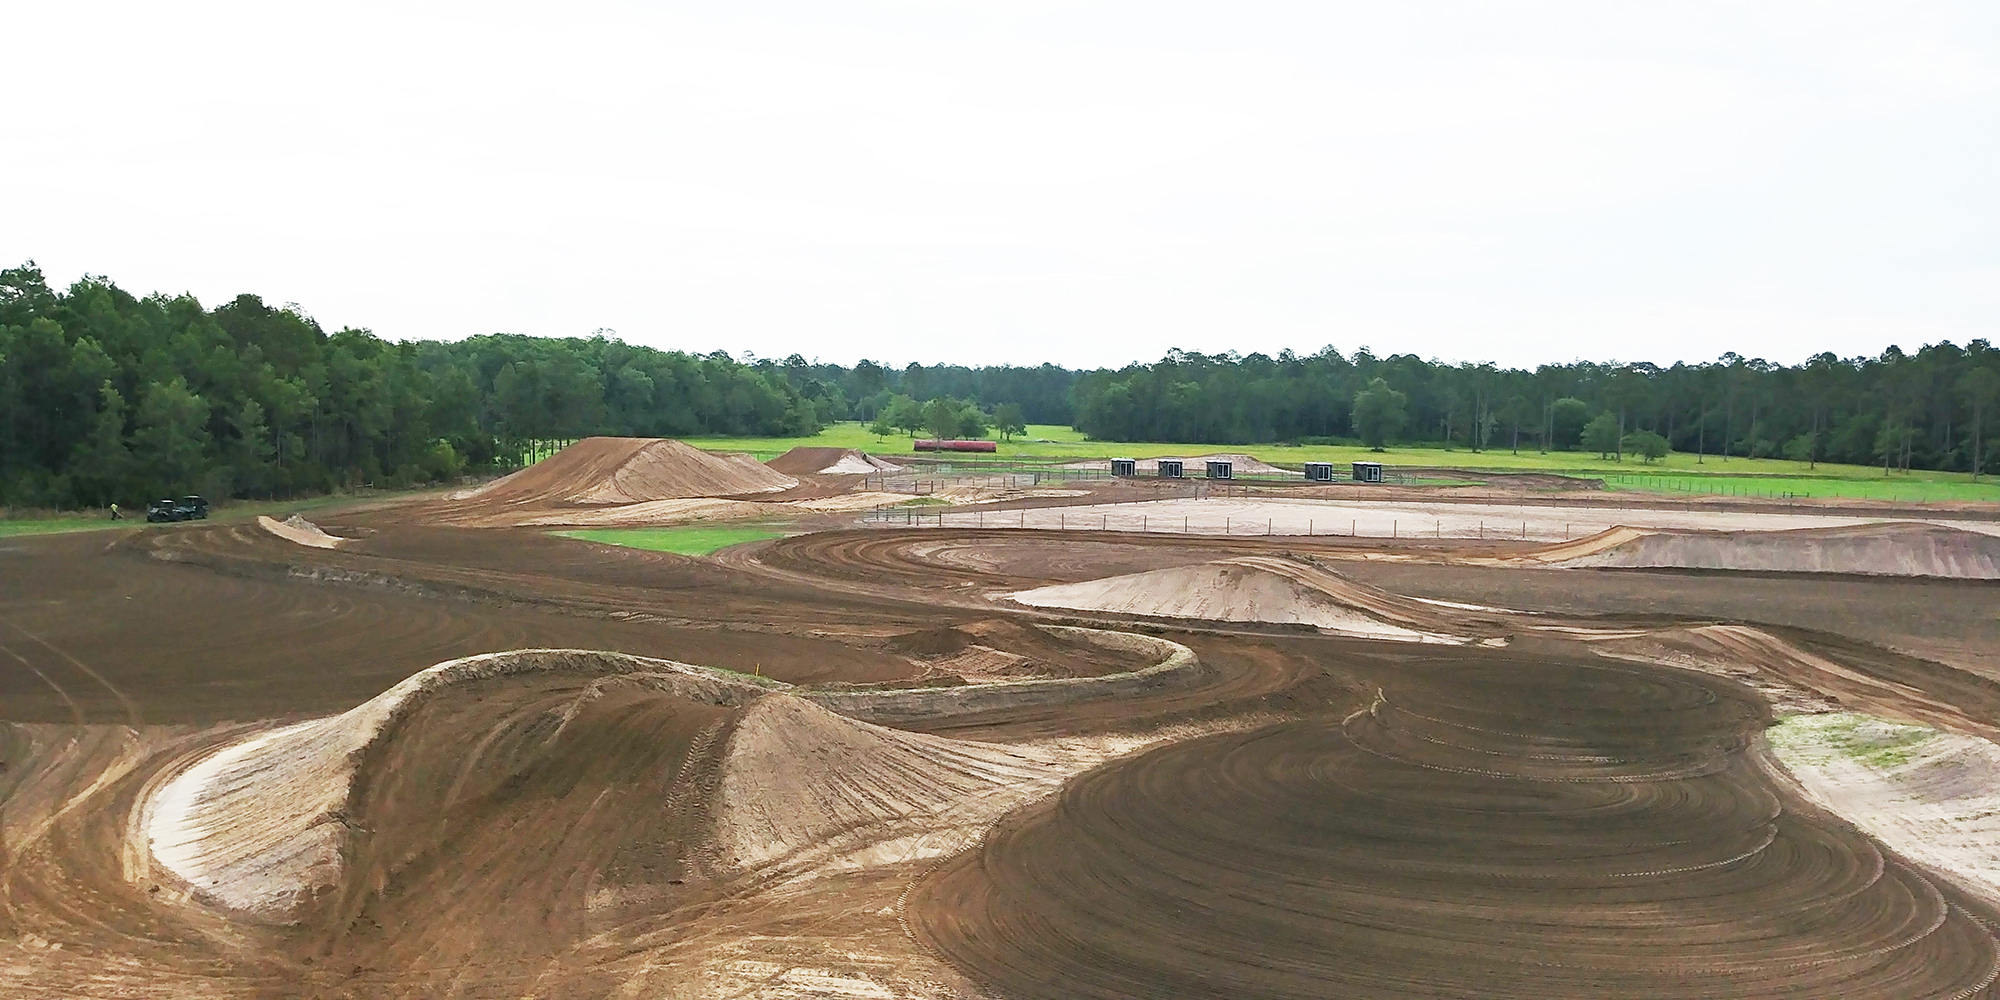 On Saturday, the site will host Round 5 of the 2019 Lucas Oil Pro Motocross Championship Florida National.